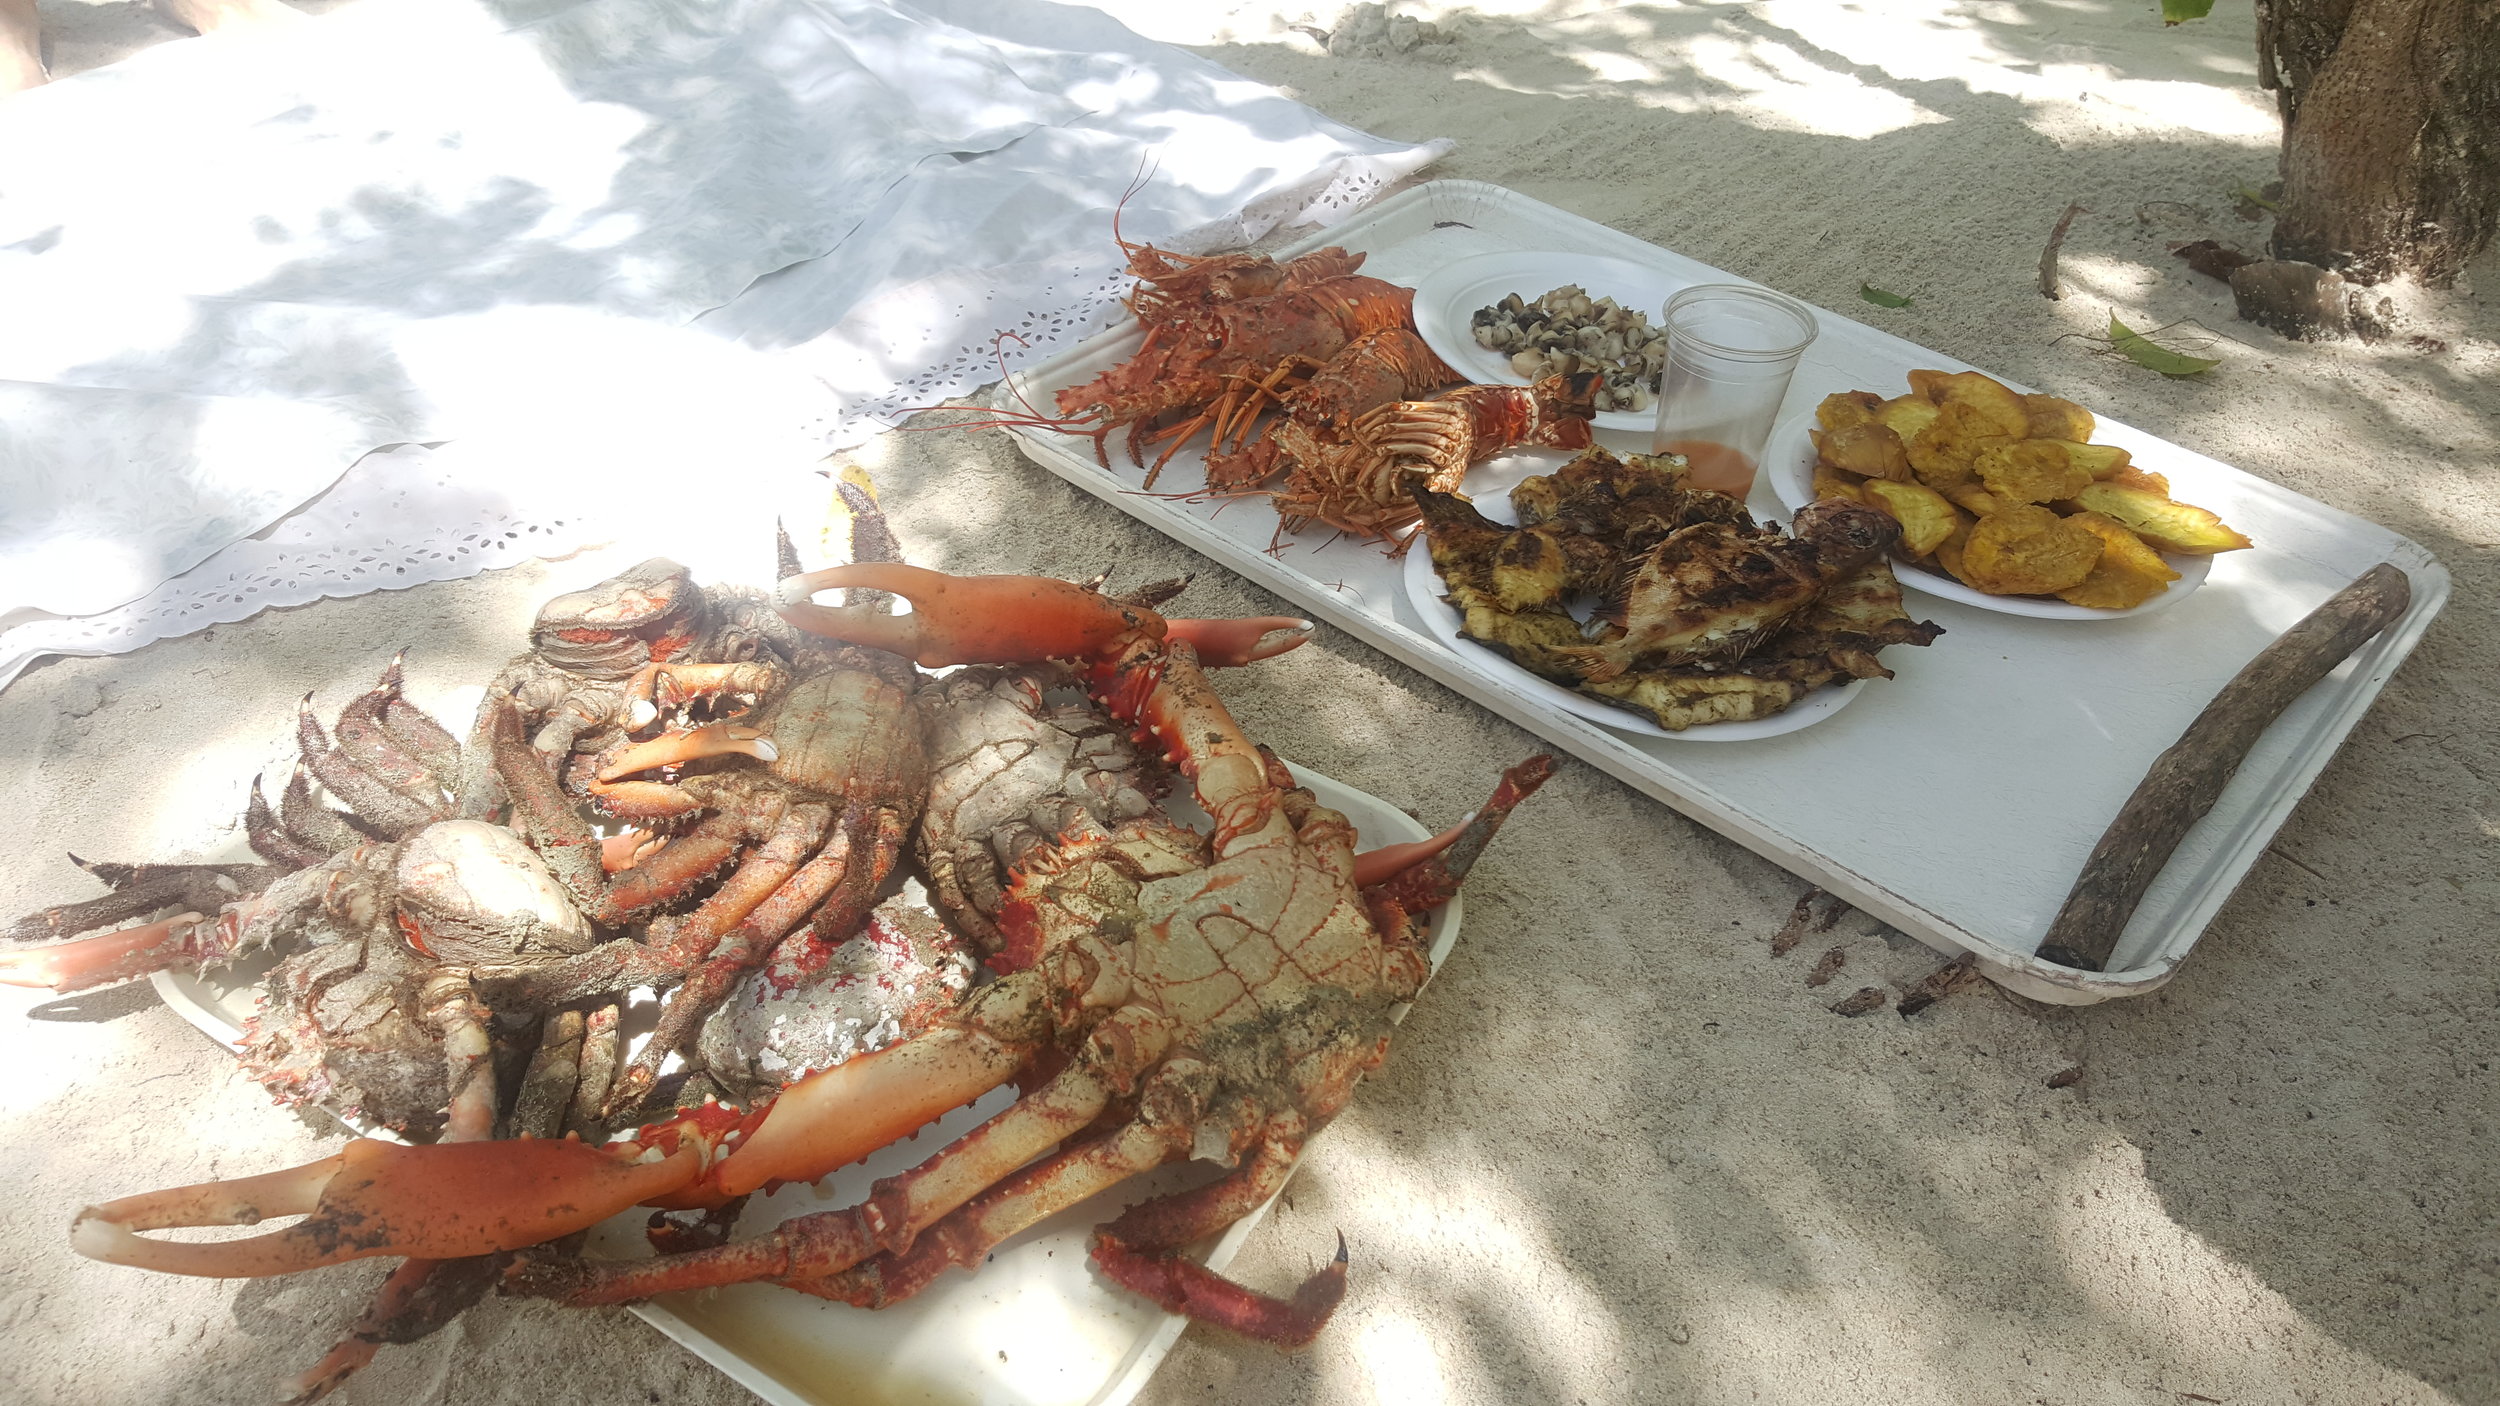  Lunch is ready!&nbsp; We used a stick and a rock to crack open the crab legs and lobster tails.&nbsp; They used a very spicy Haitian sauce on the conch which was tasty.&nbsp; It was very simple - pure seafood, no frills!&nbsp; Our favorites were the